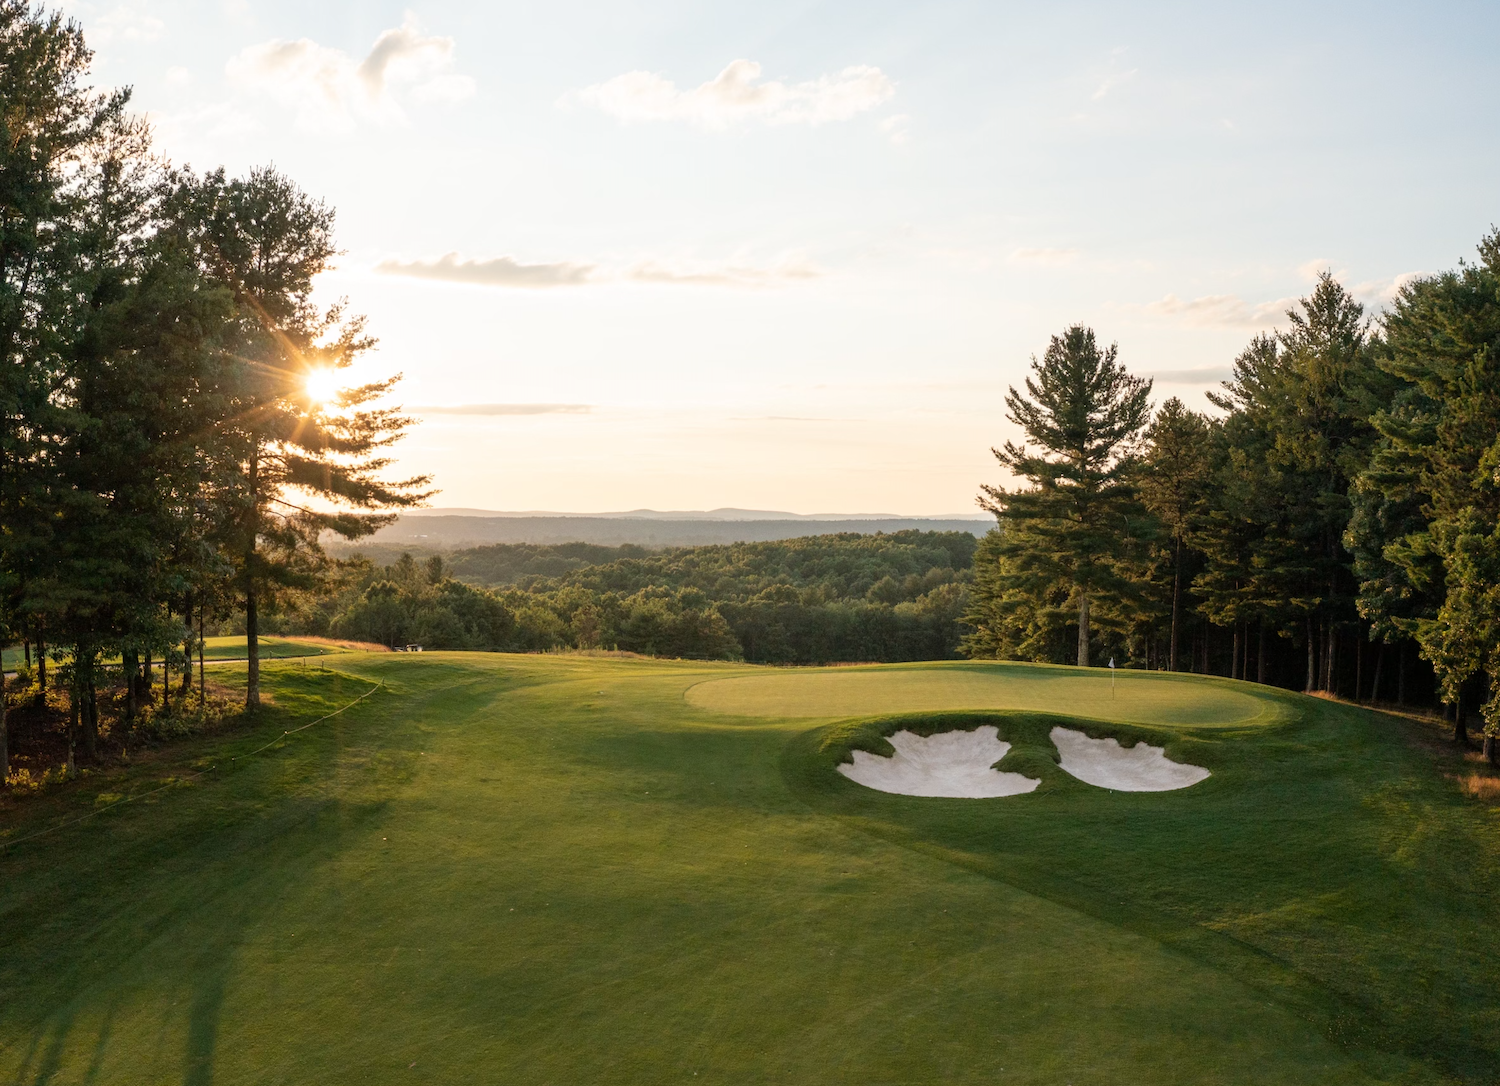 The International is improving to become the best private golf club in Boston